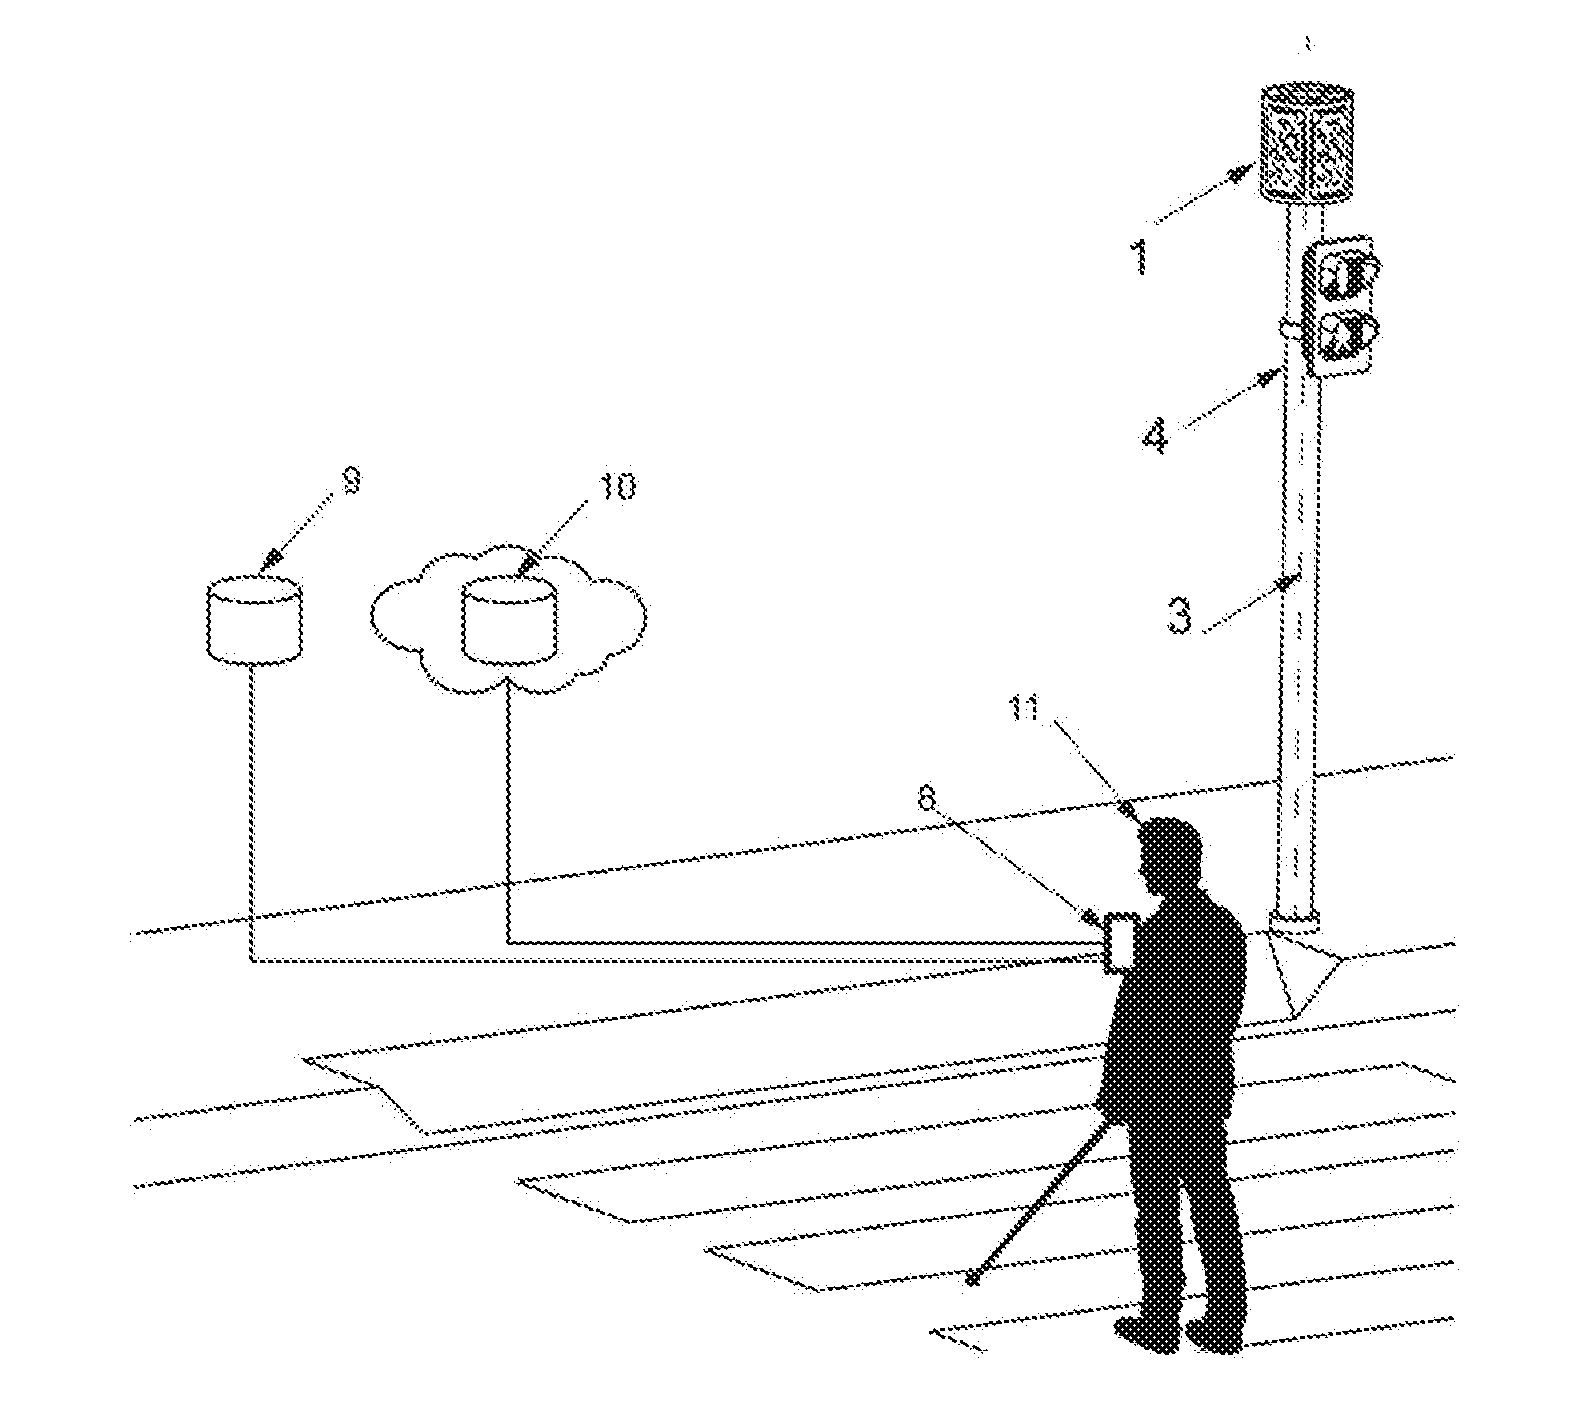 Signal for identifying traffic lights for computer vision